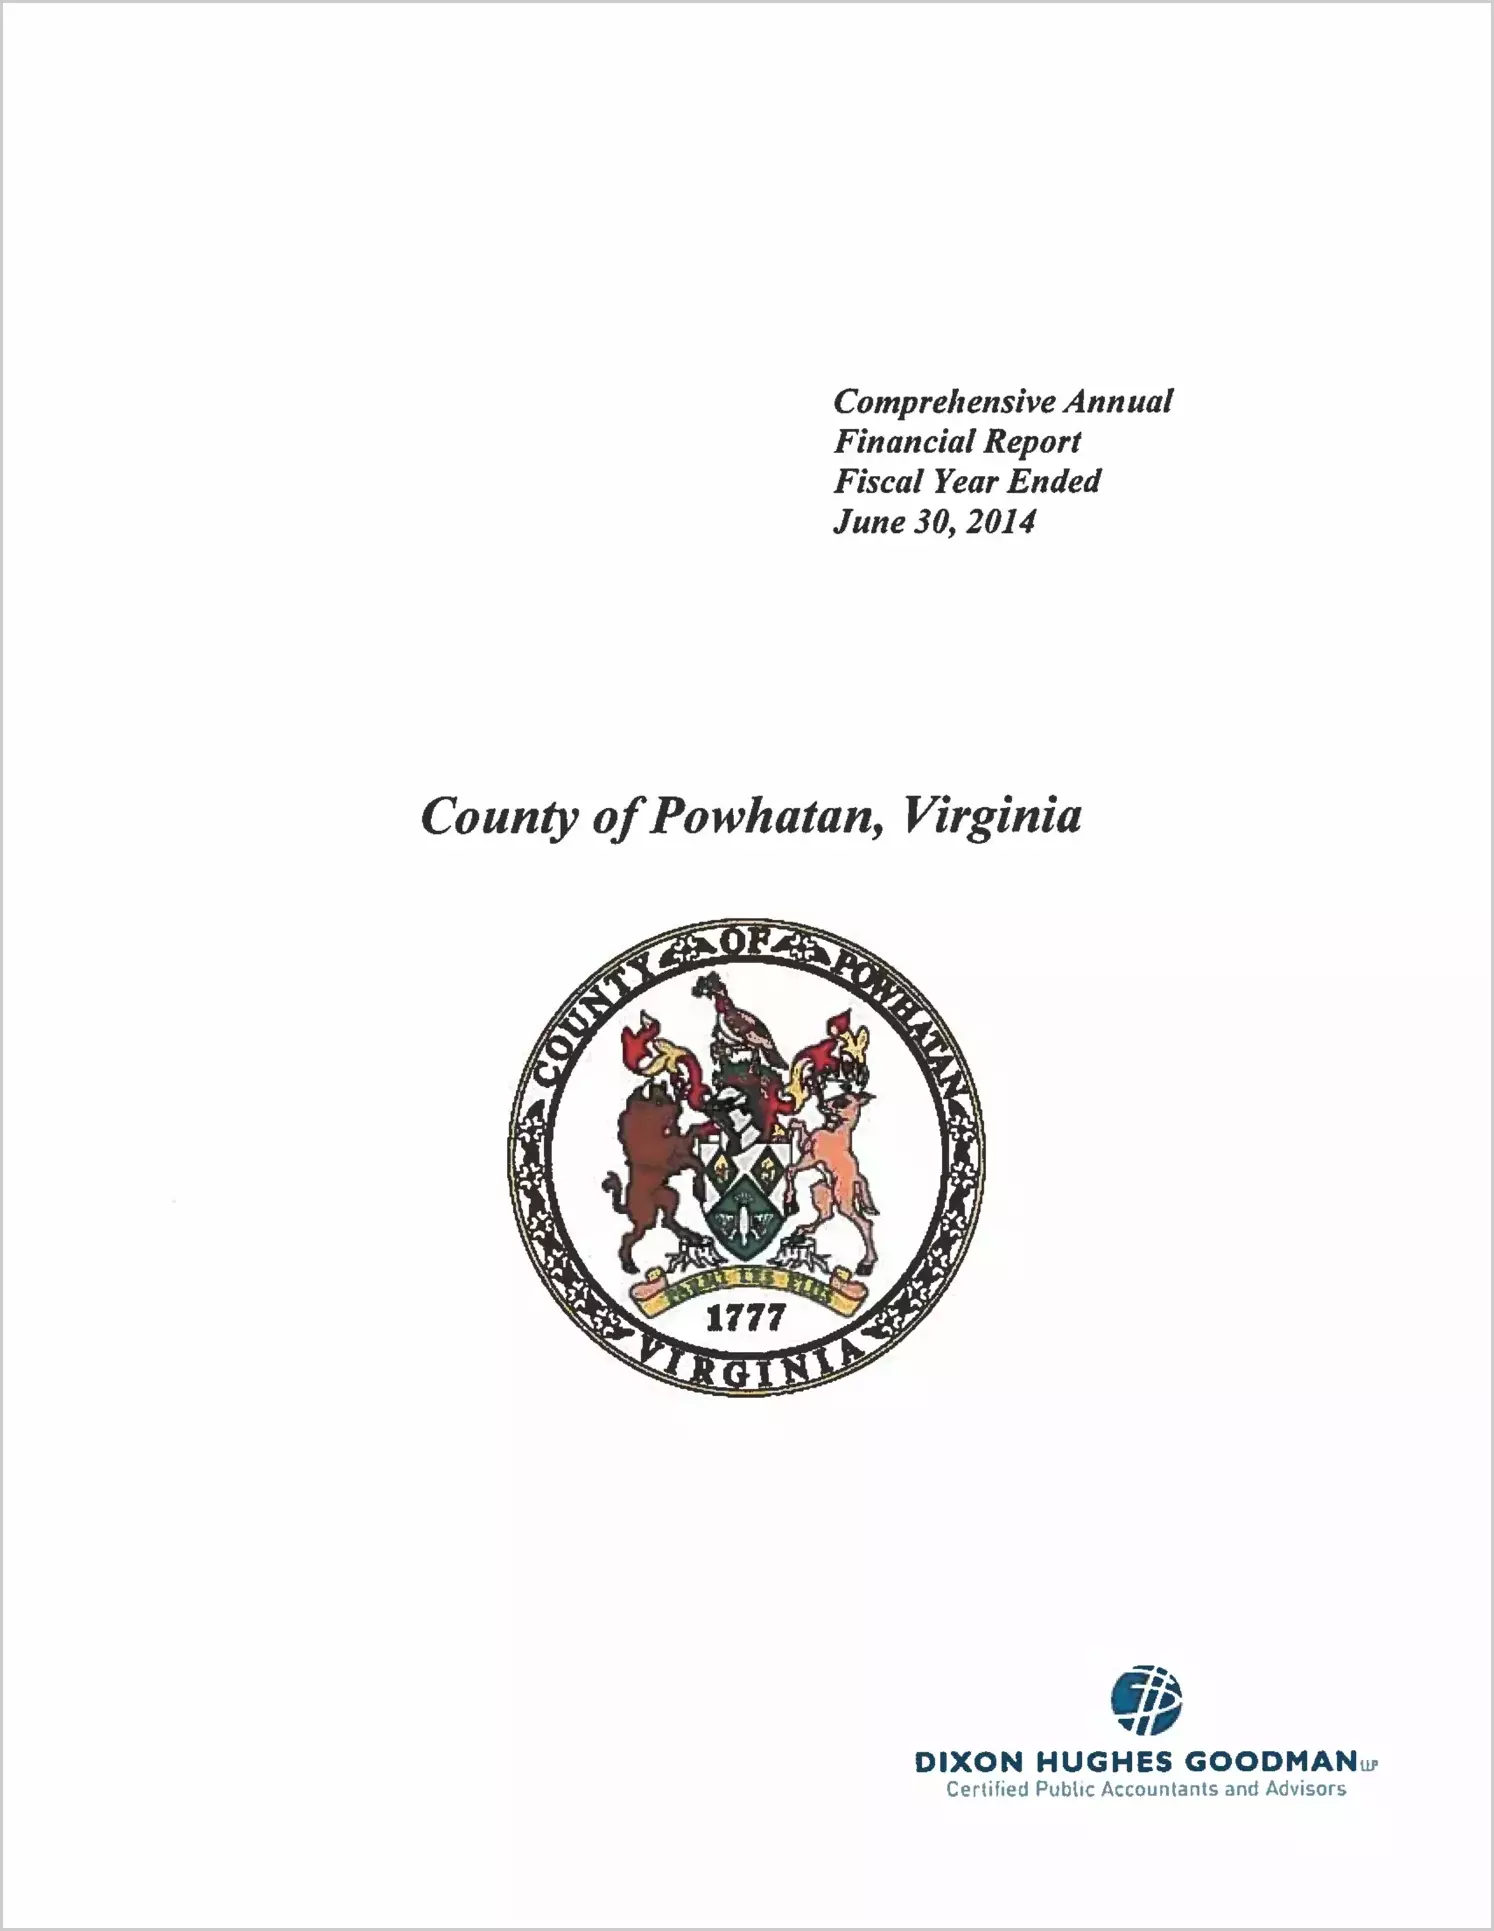 2014 Annual Financial Report for County of Powhatan